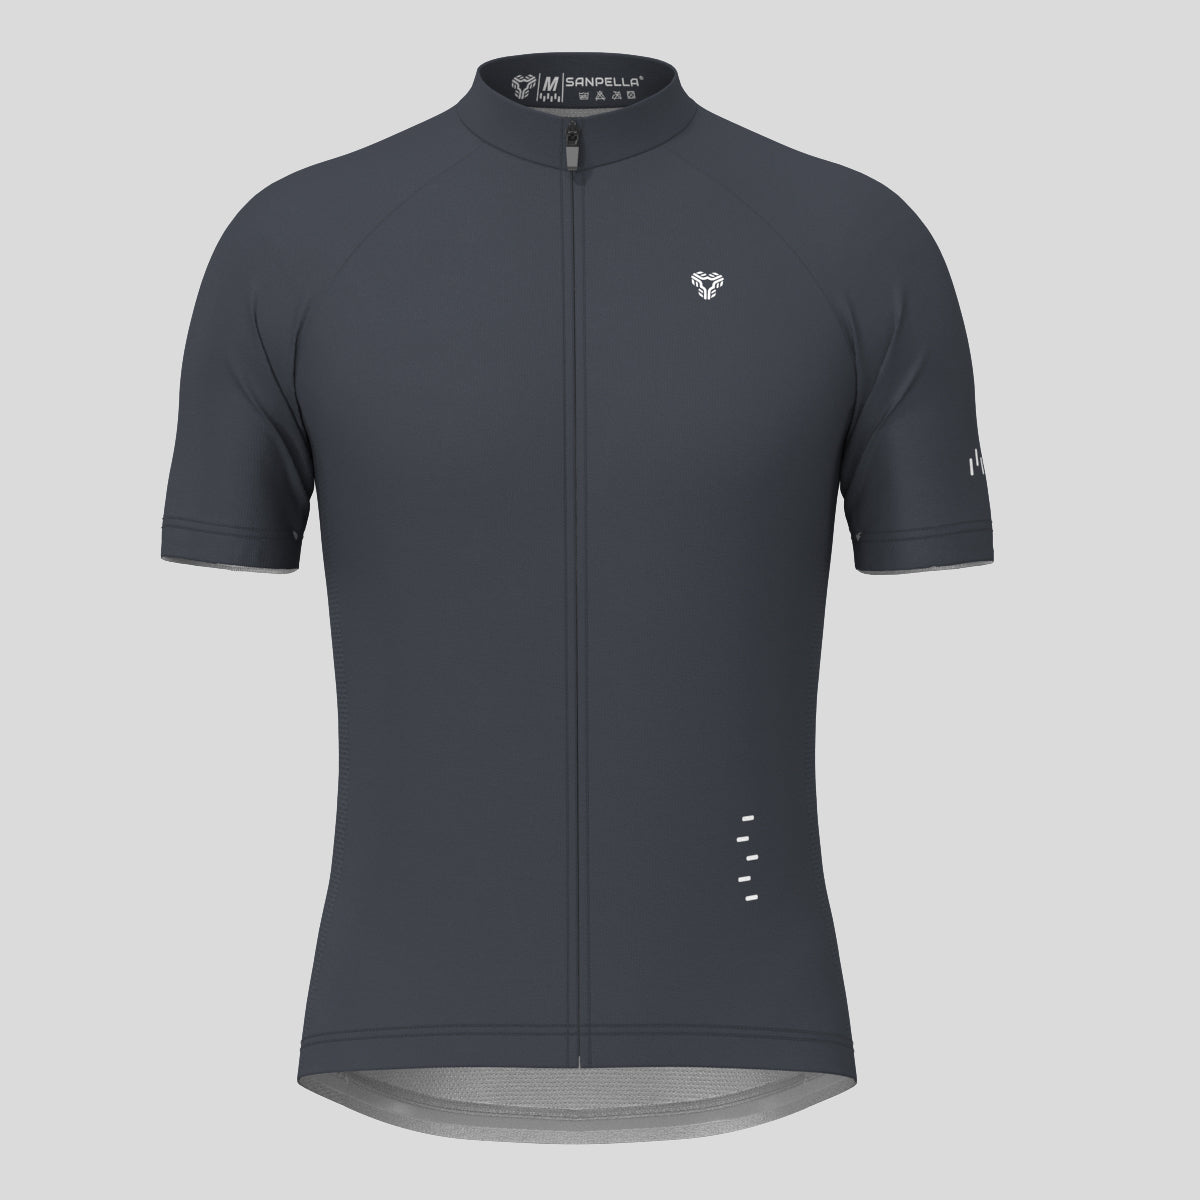 Men's Minimal Solid Cycling Jersey -Graphite